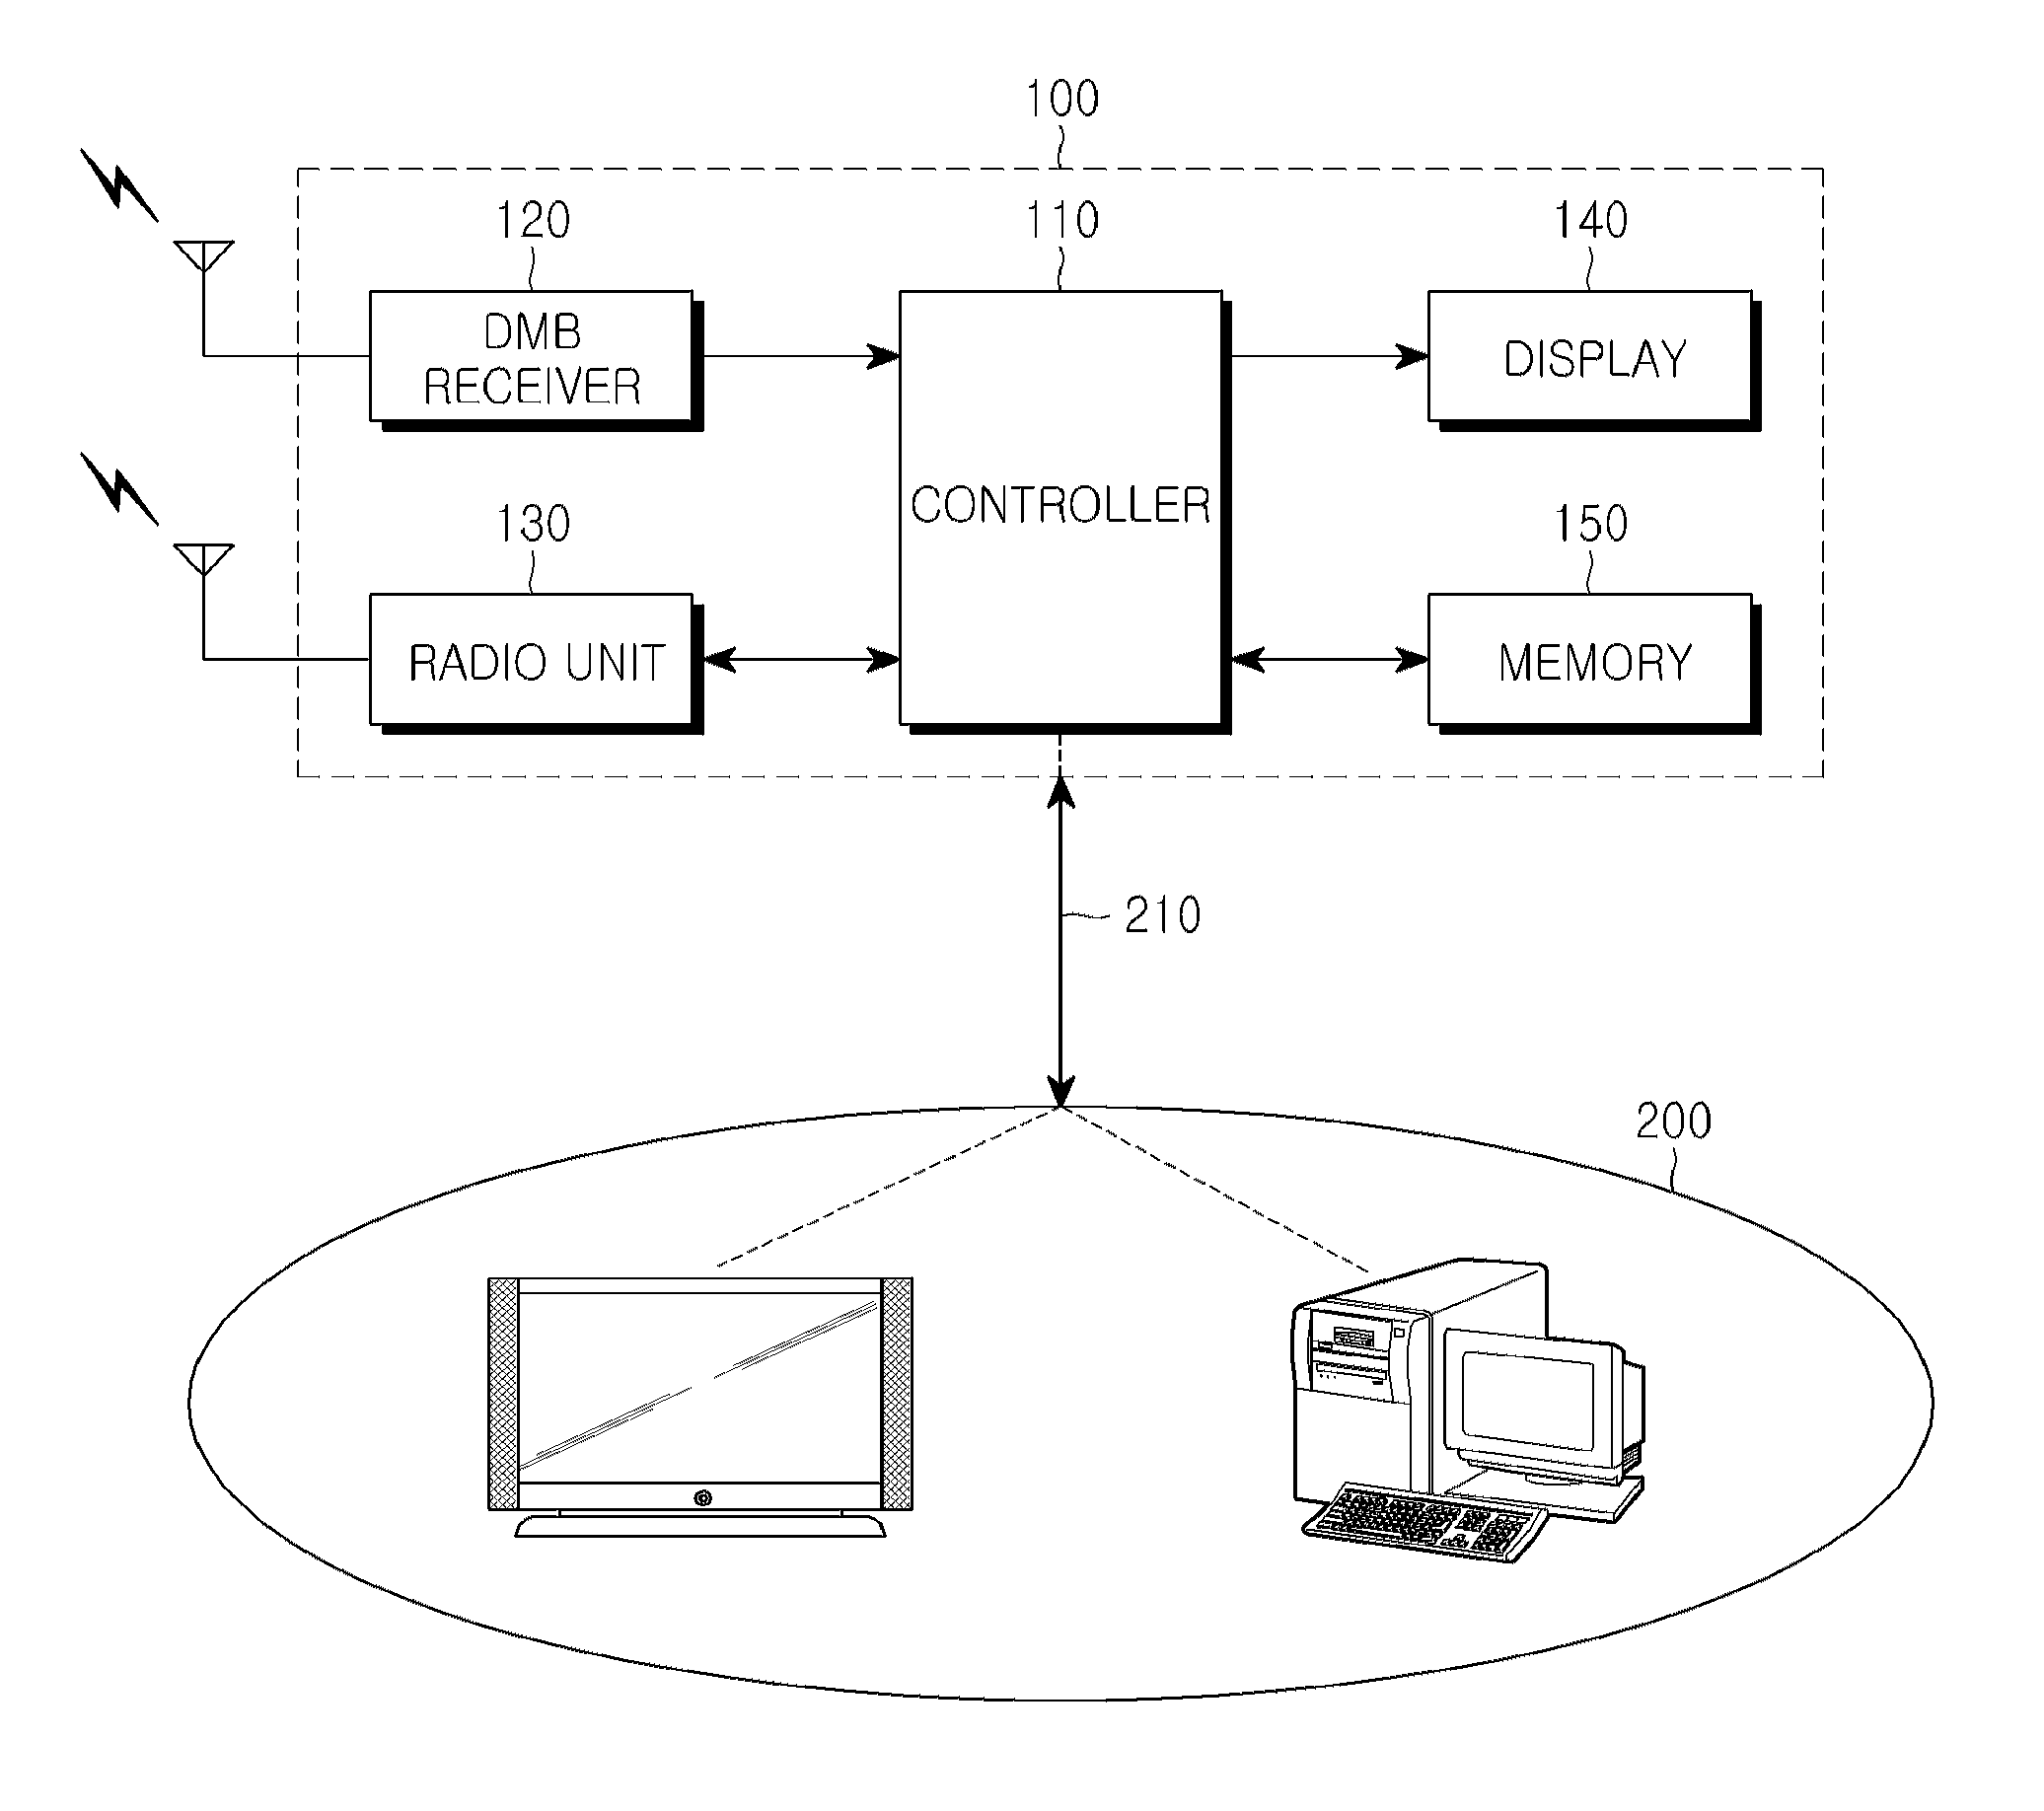 Display control apparatus and method in a mobile terminal capable of outputting video data to an external display device